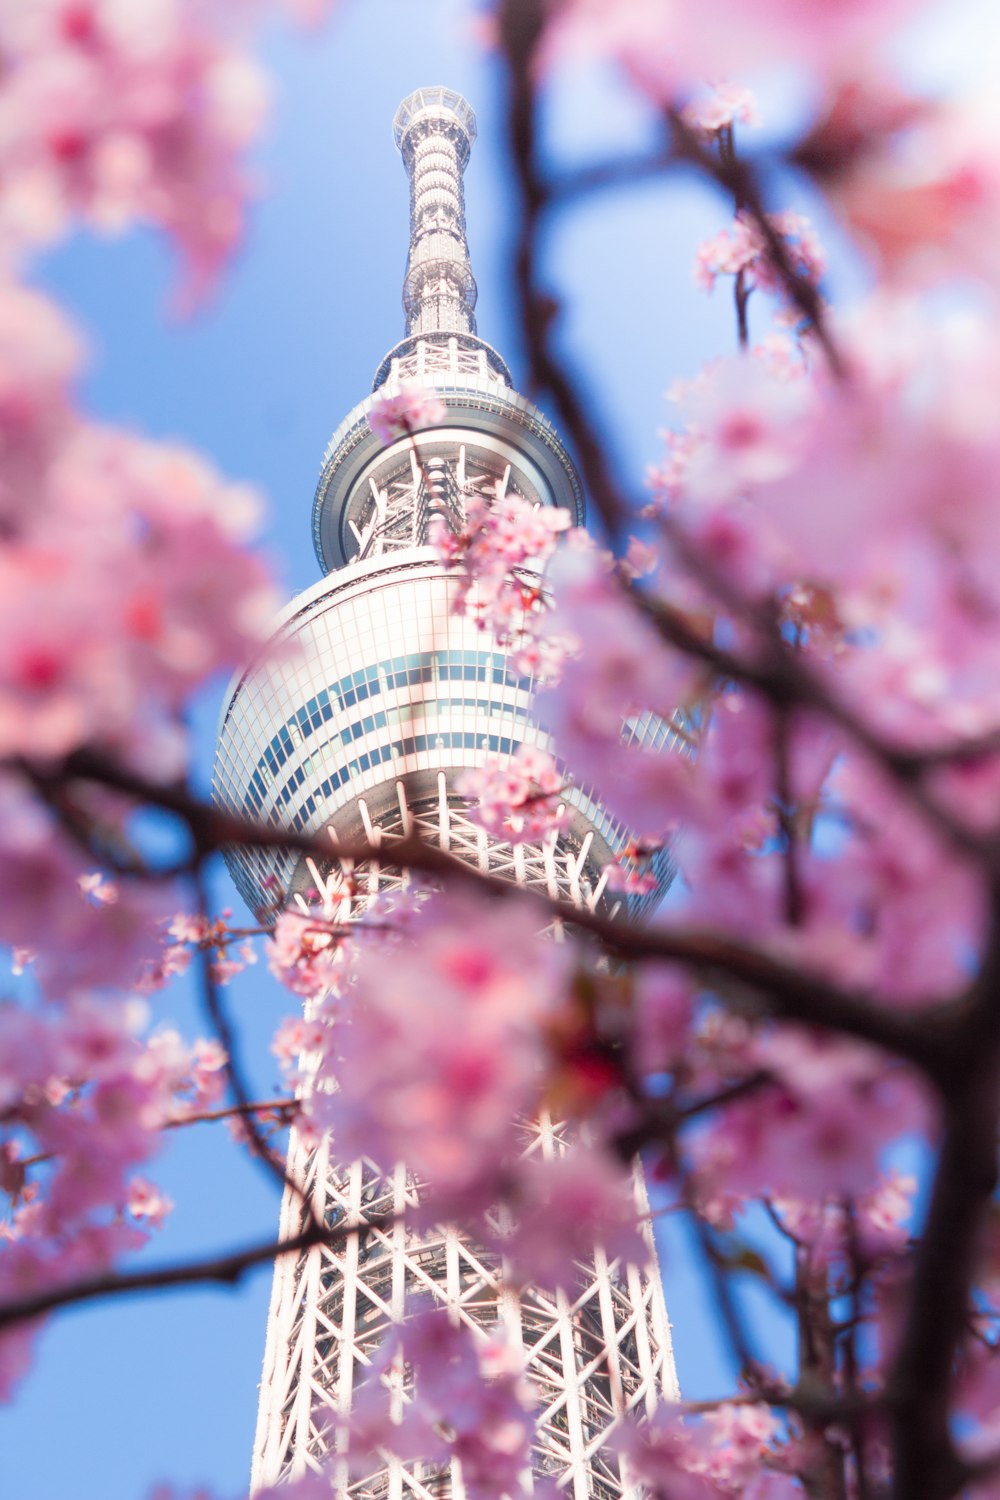 pink cherry blossom tree near white and blue tower during daytime